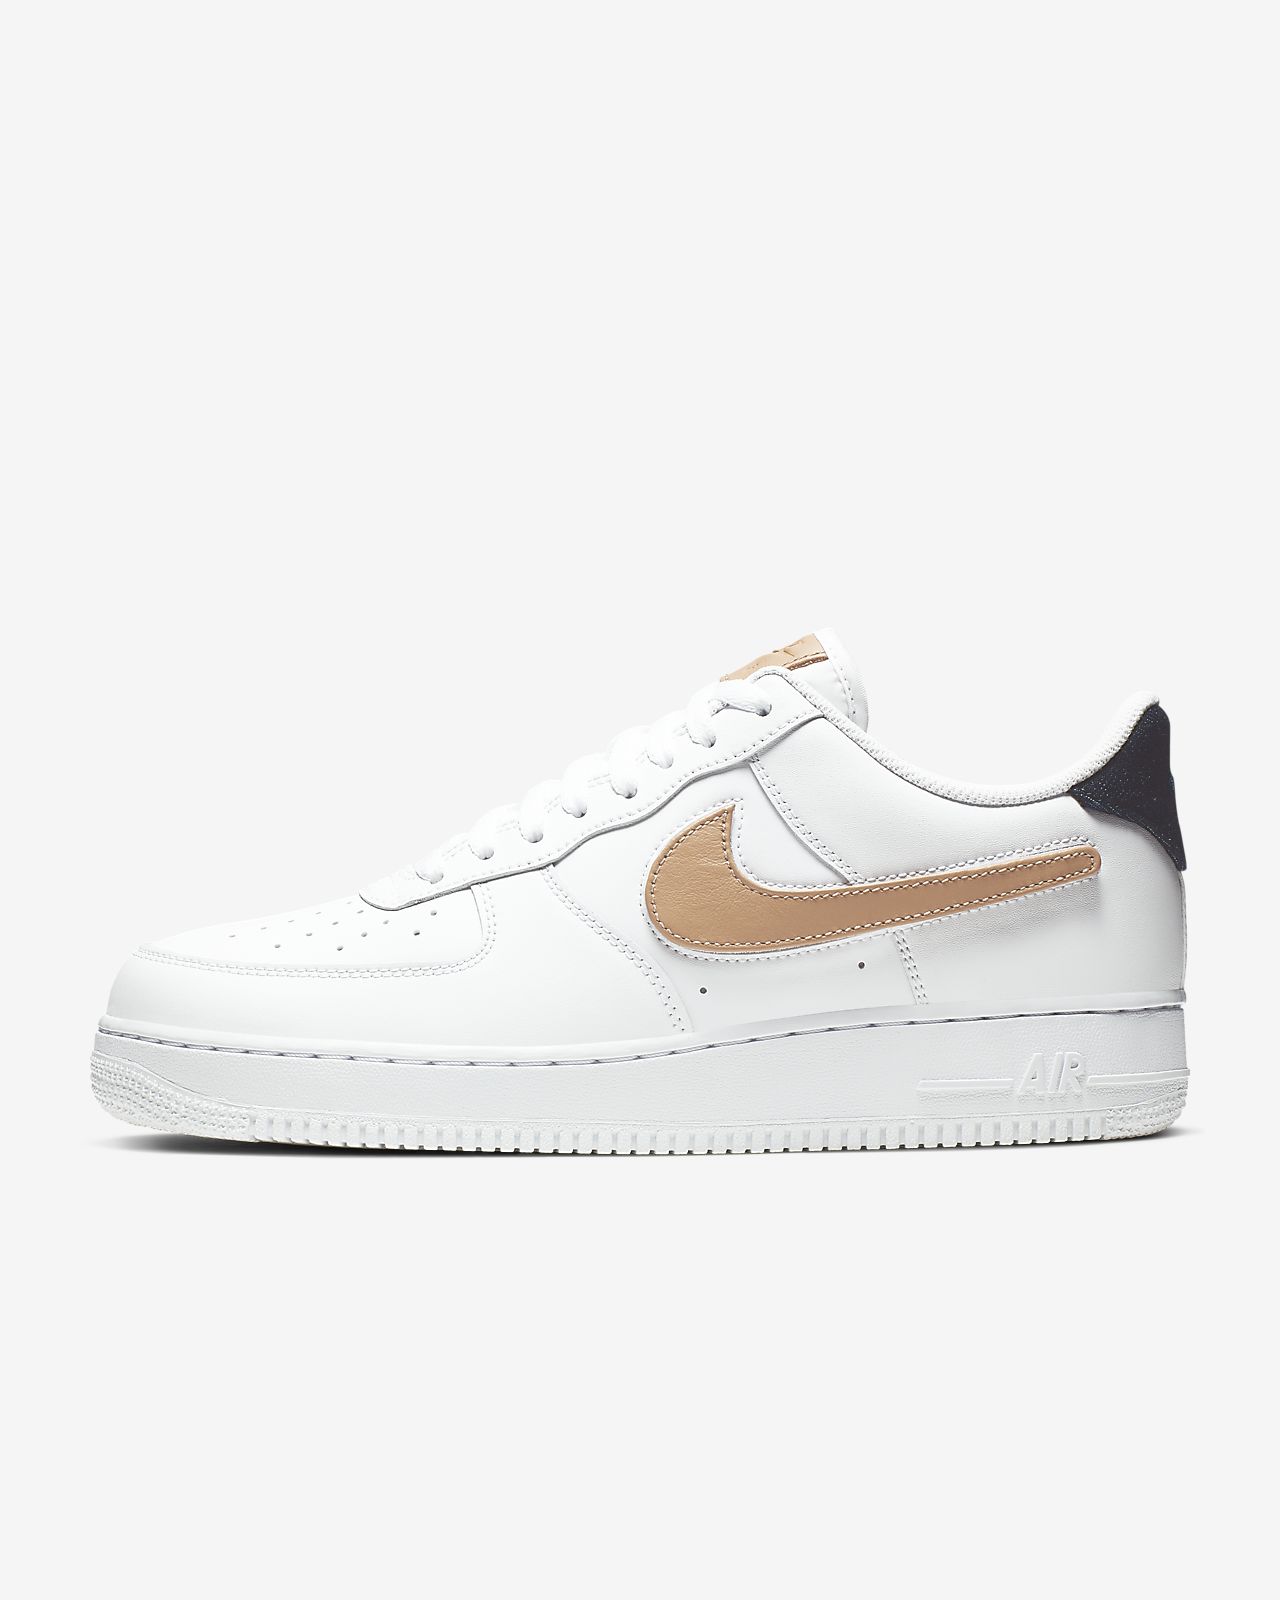 air force one 07 lv8 3 cheap online